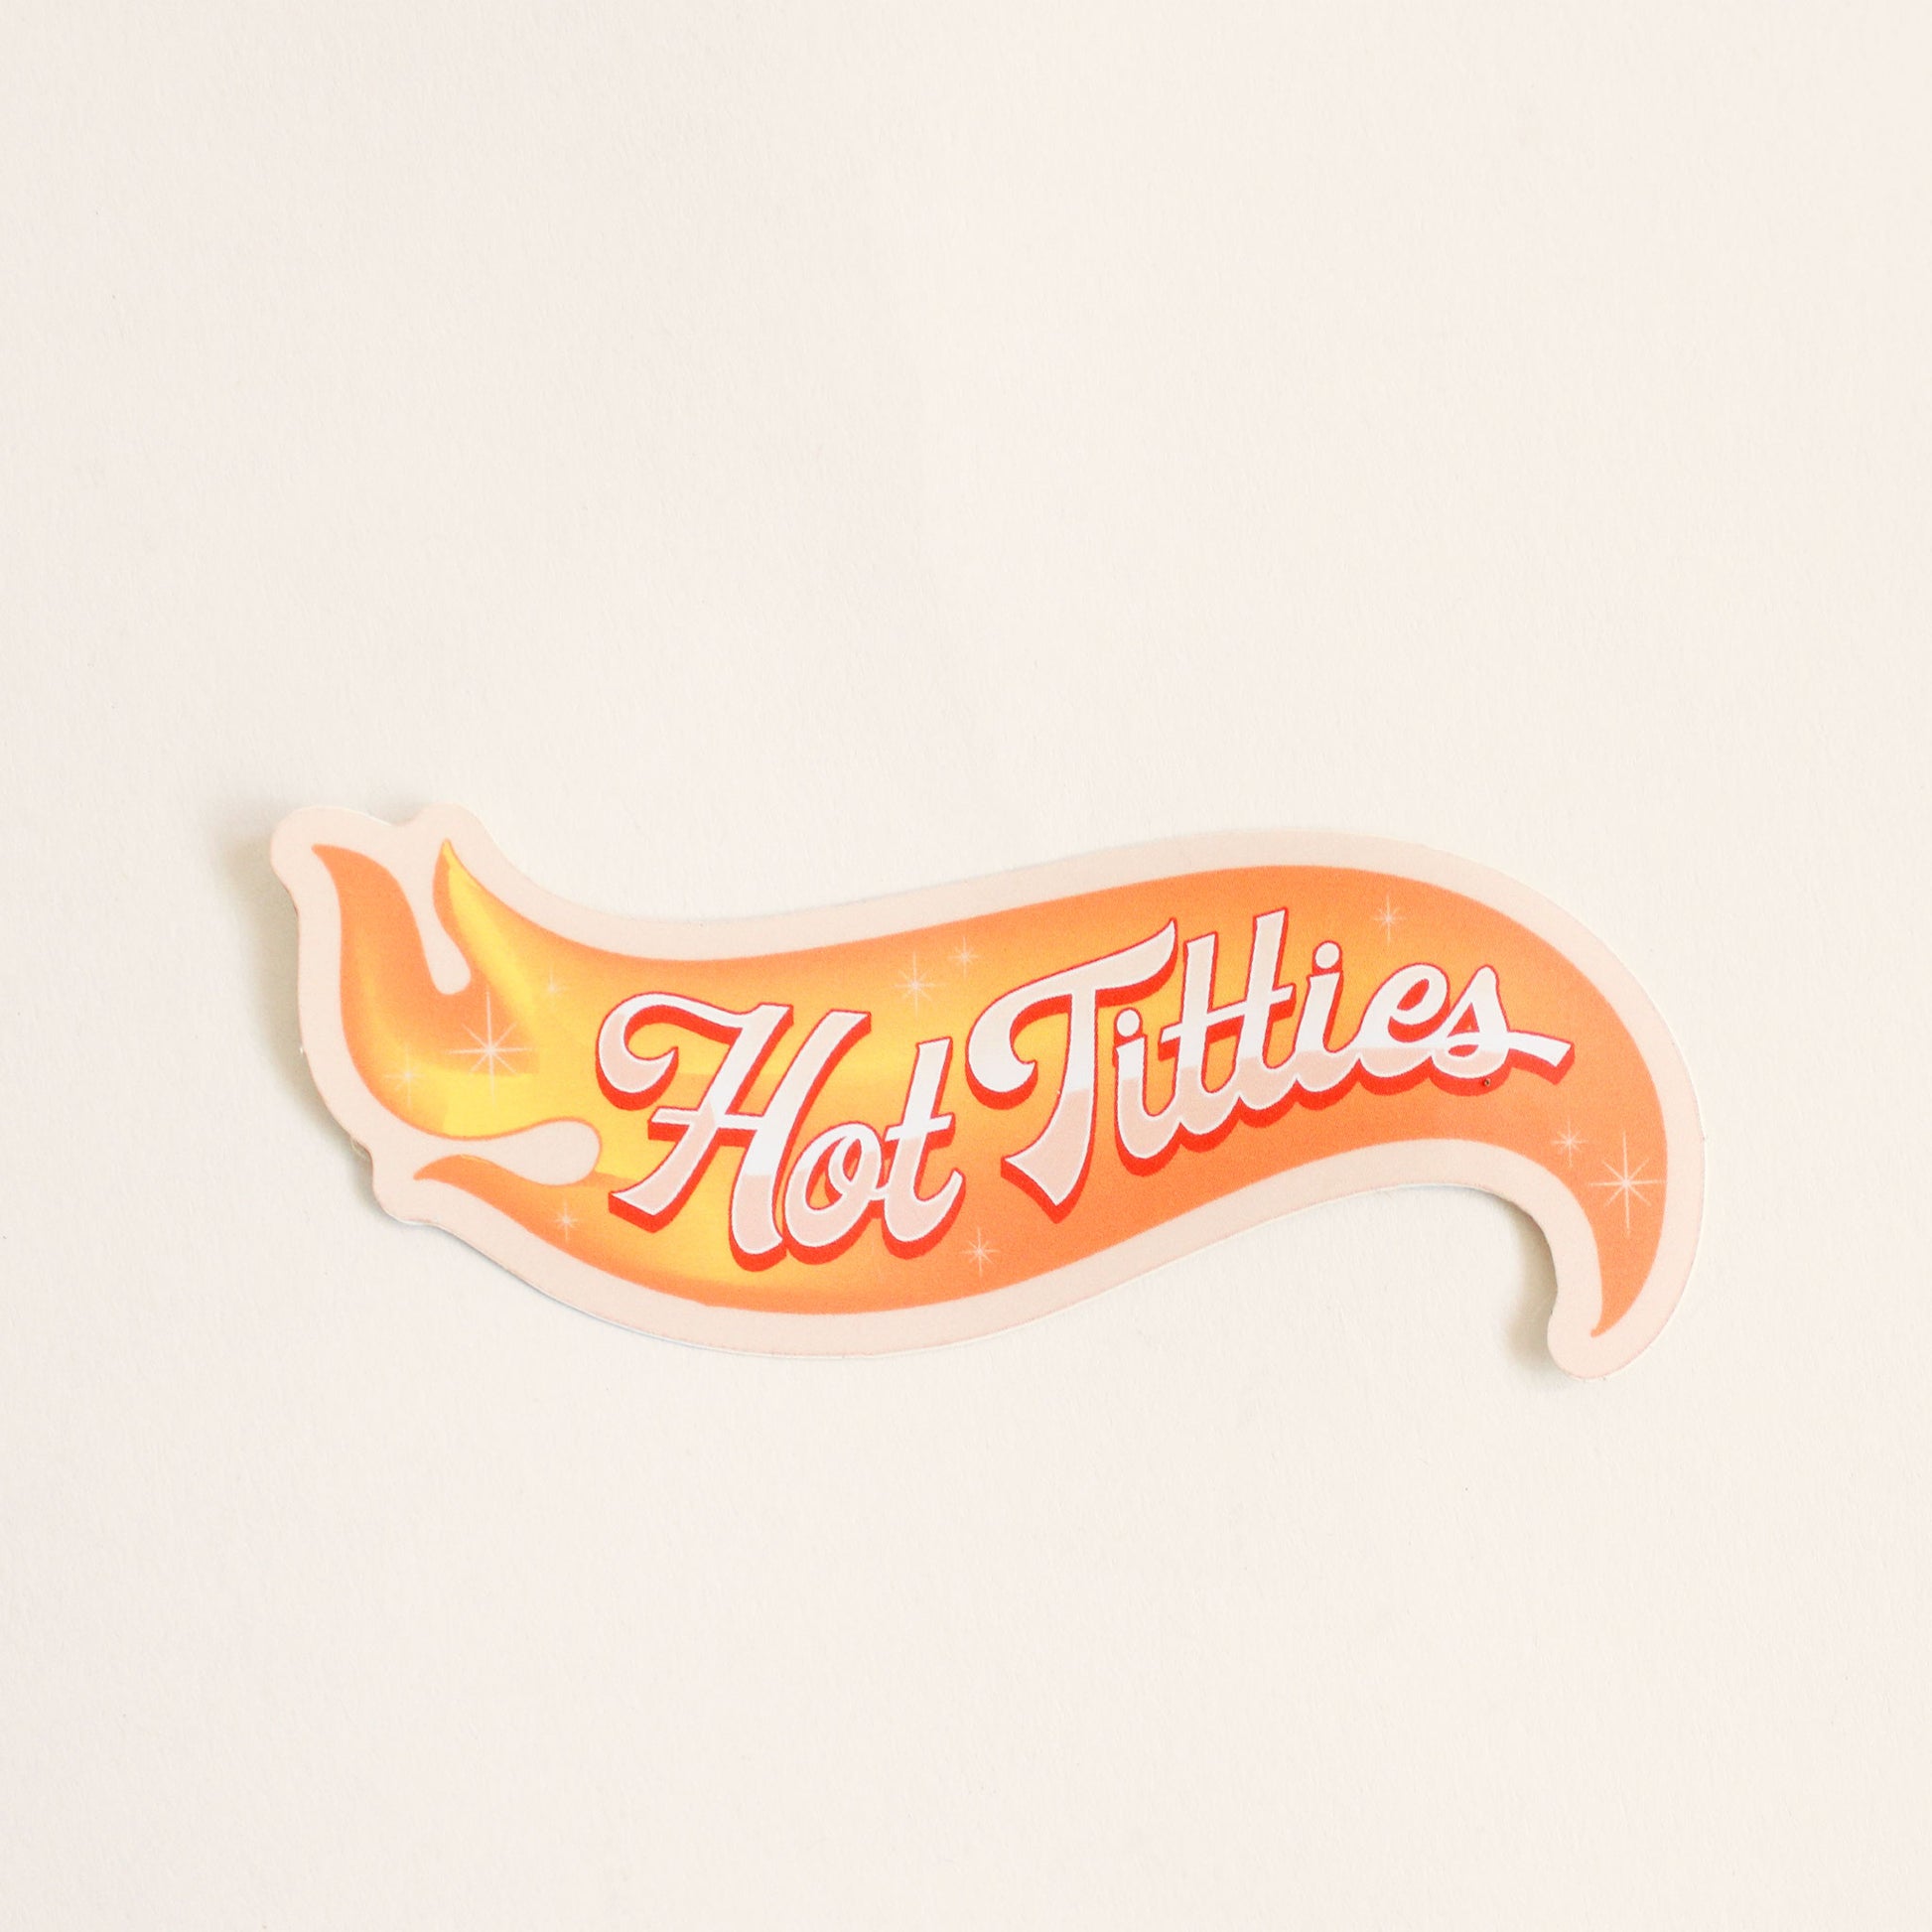 Flame sticker reading 'Hot titties' in white cursive text. The lettering is accented in red and is placed across the flame design.